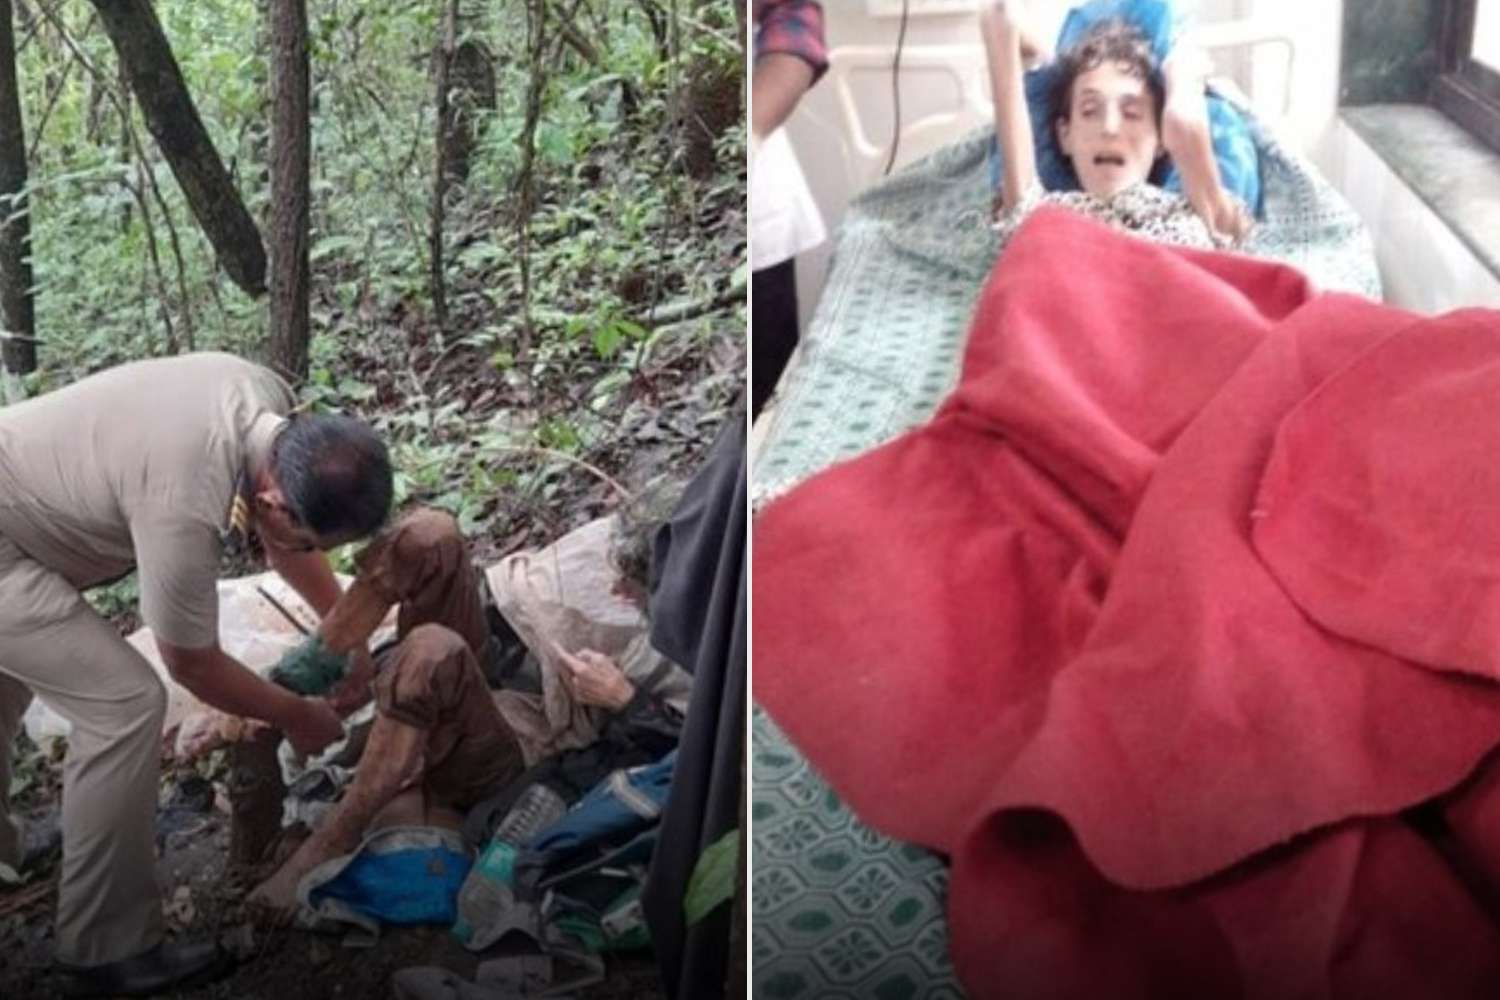 American Woman Found Chained to a Tree in India Went Without Food for 40 Days, Was Allegedly Left to Die